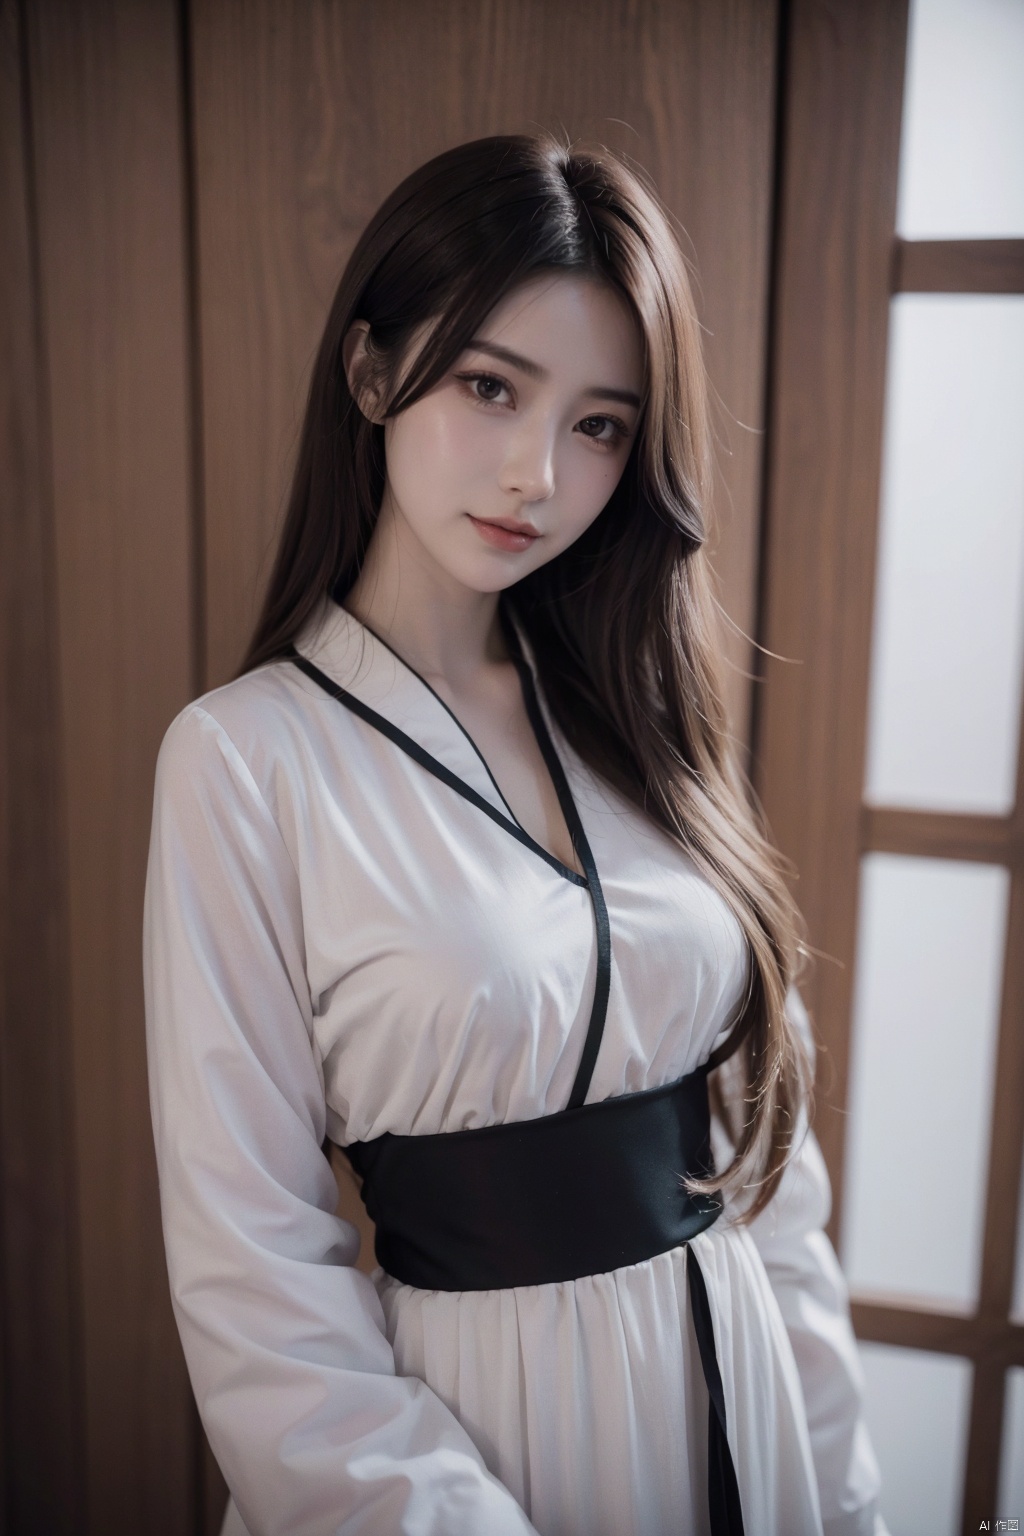 girlvn01, 1girl, hanfu, smile, Stunningly Beautiful girl, Haute_Couture, designer dress, wearing Haute_Couture, posing for a picture, fashion show, long shaped face, dark red eyes, sandy blonde side-wept hair, long hair, long ringlets, catwalk aesthetic, details, highest, amazing,